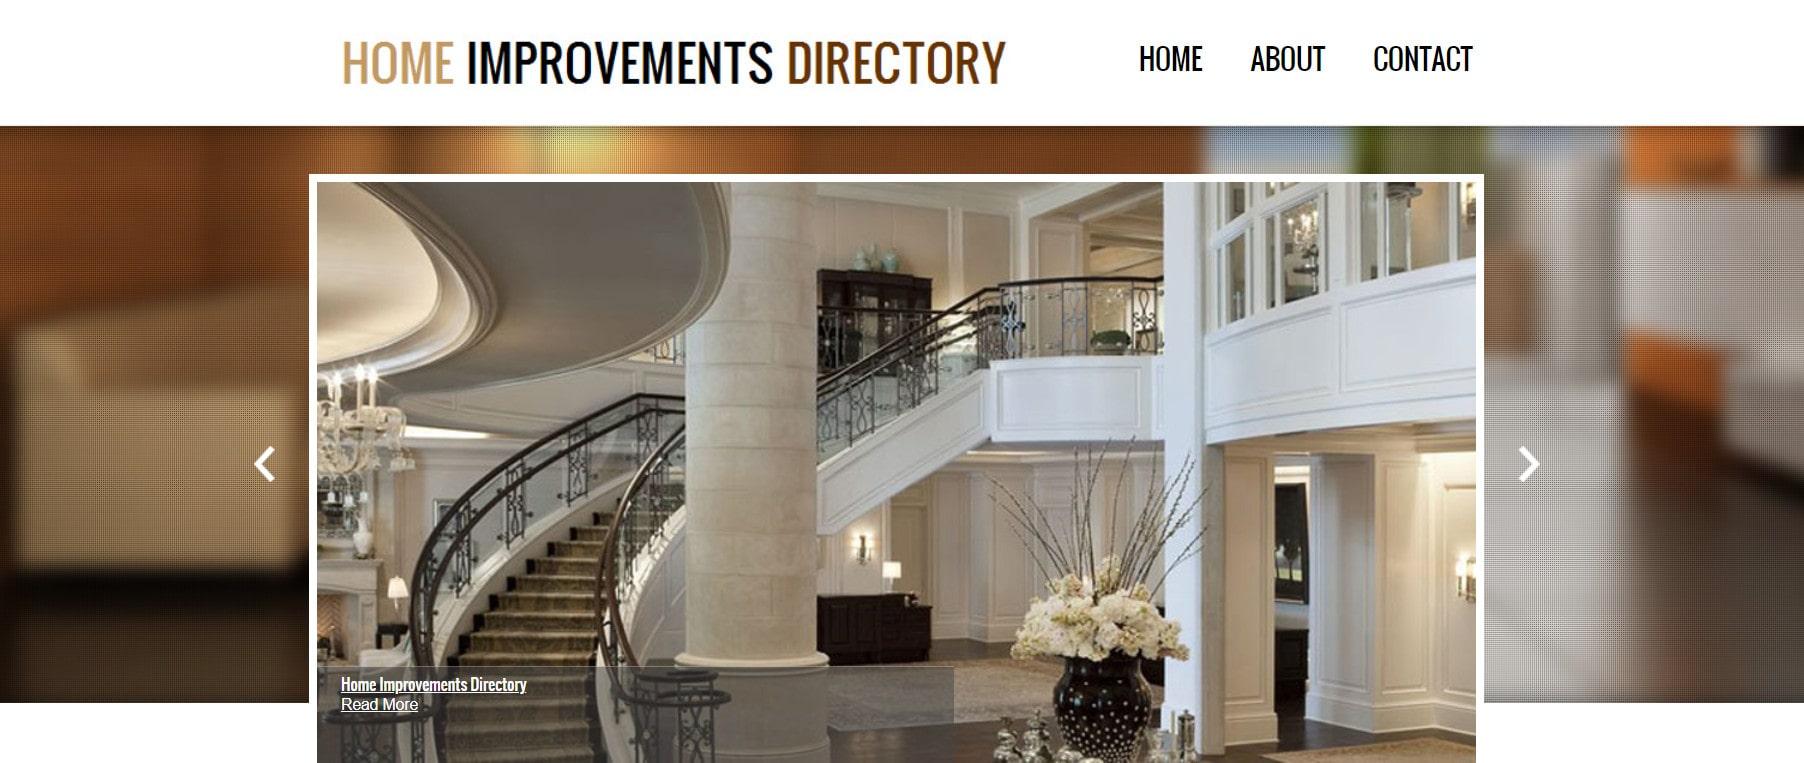 home improvements directory